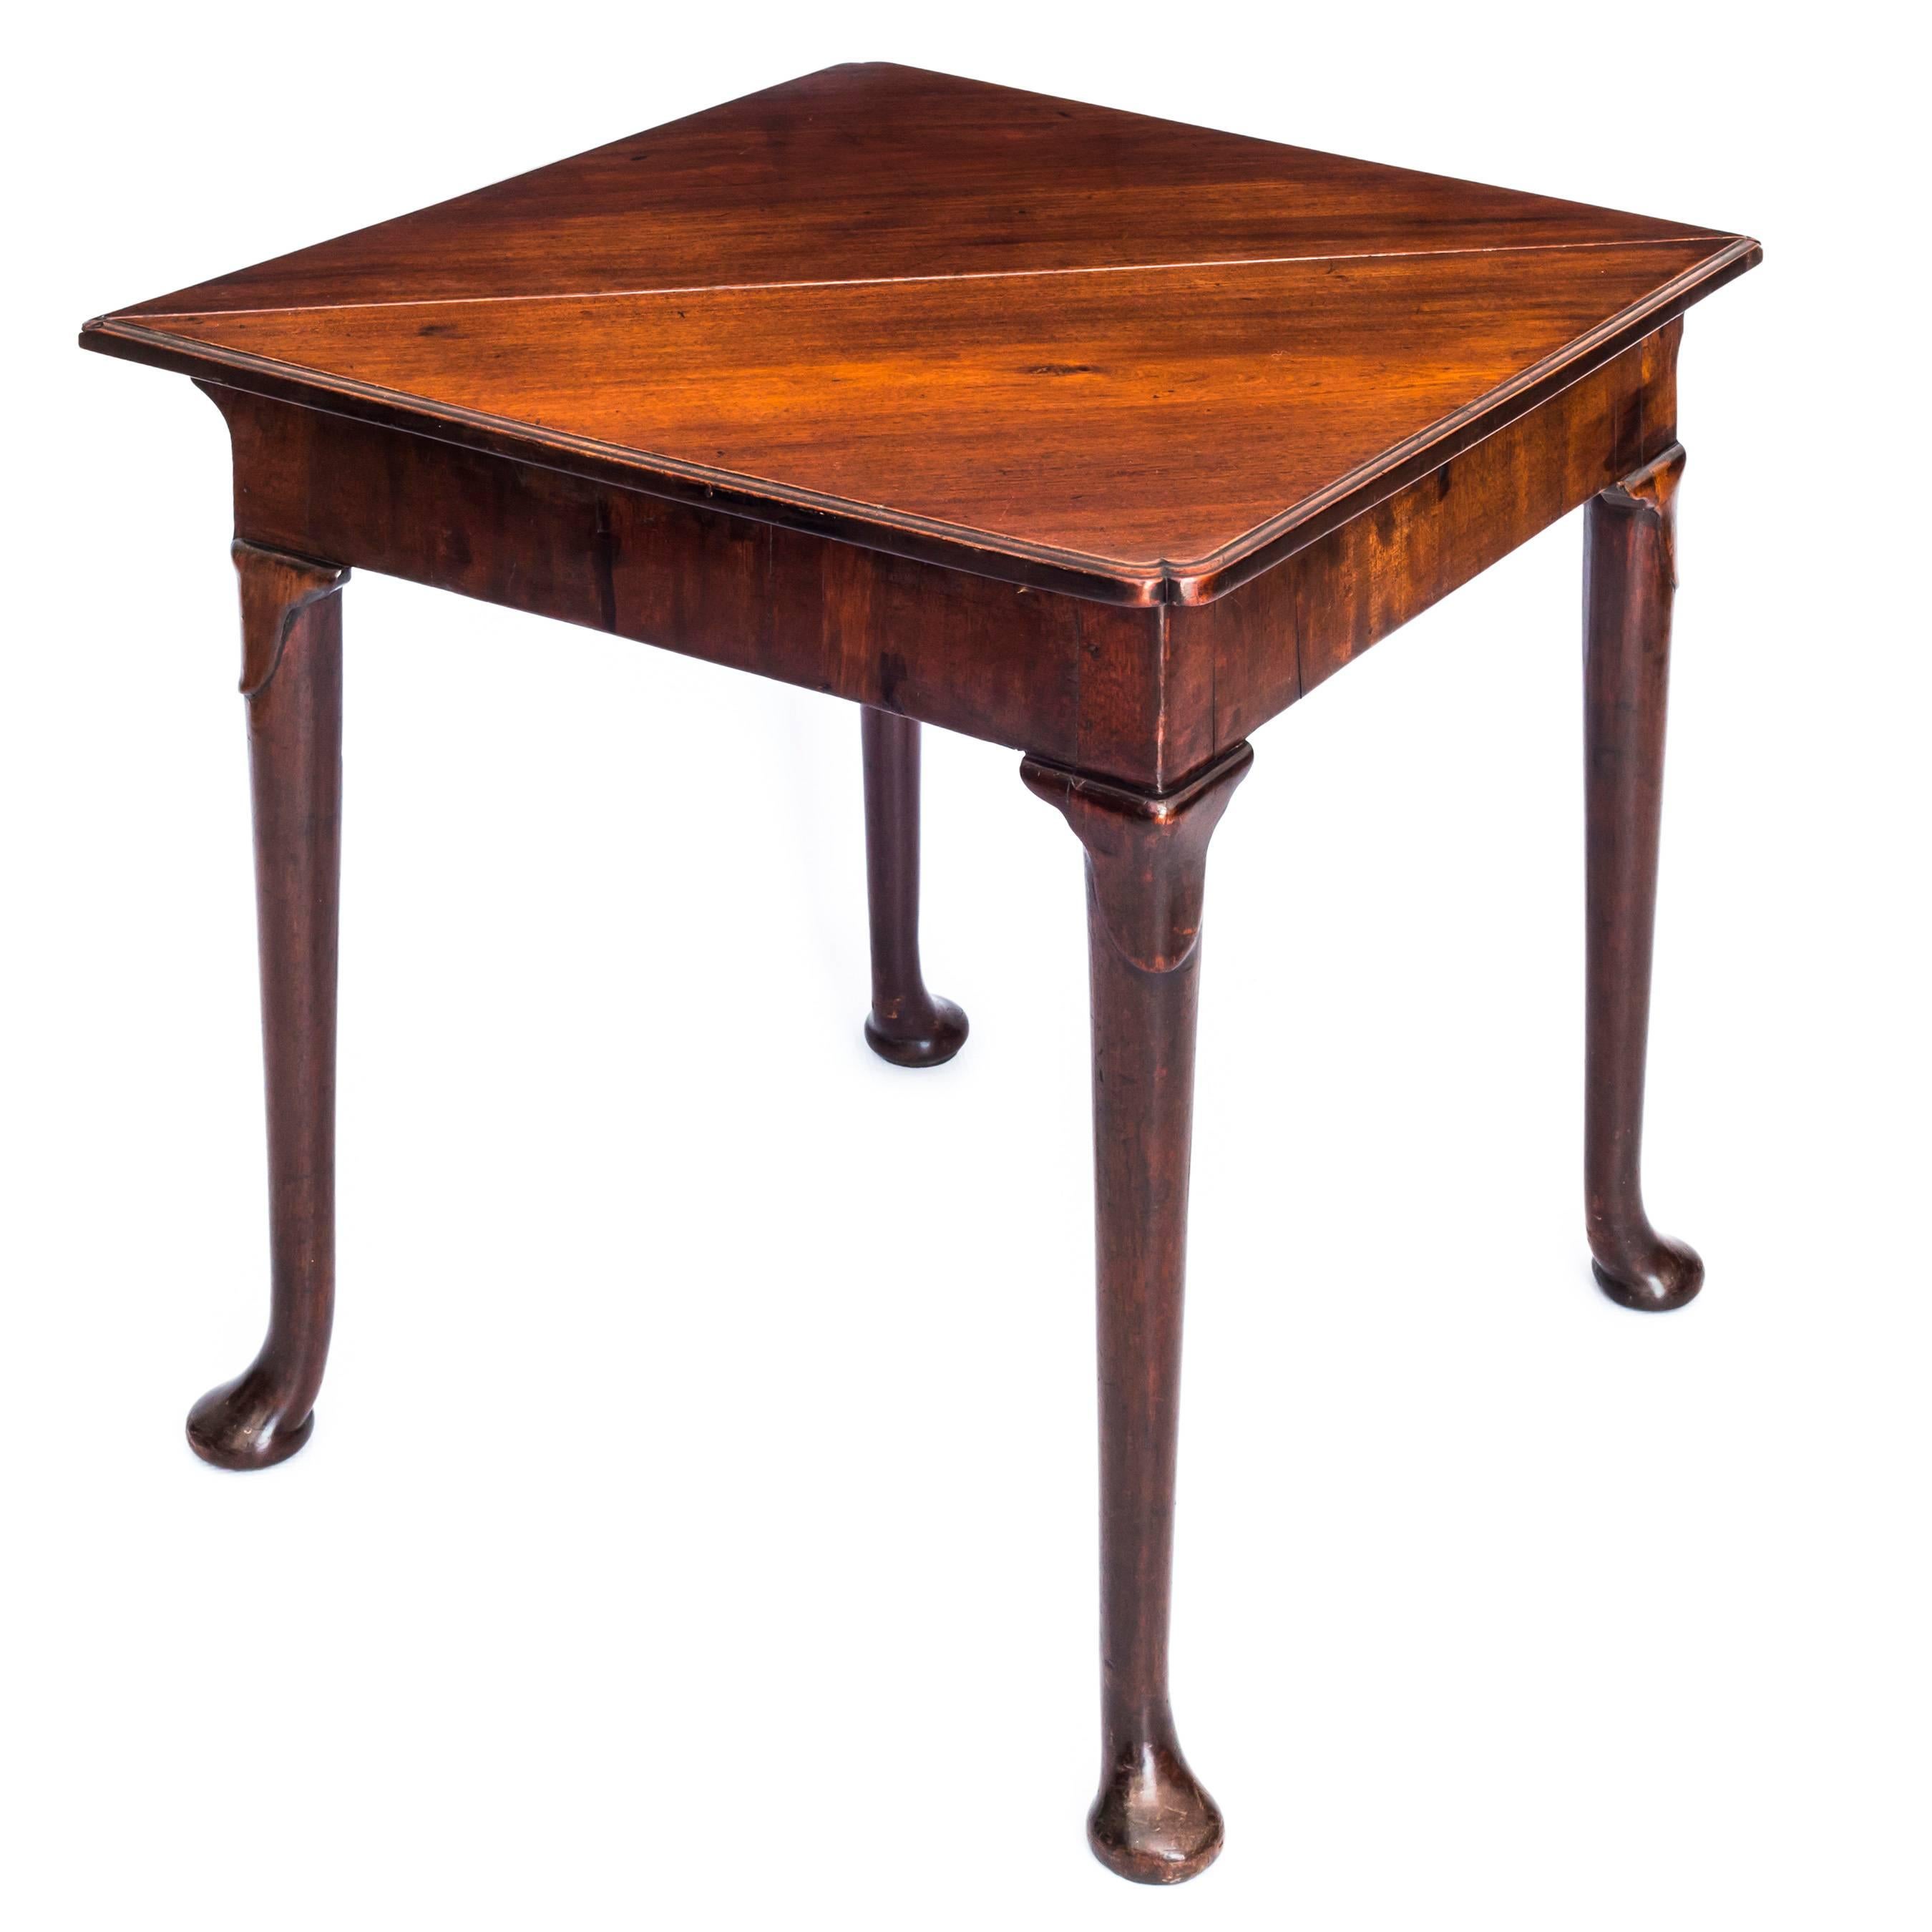 A superb mid-18th century George II period solid mahogany corner or handkerchief table, of small proportions,

English, circa 1750.

The triangular solid mahogany top, having a rear-drop leaf, with a moulded edge and re-entrant opposing corners,